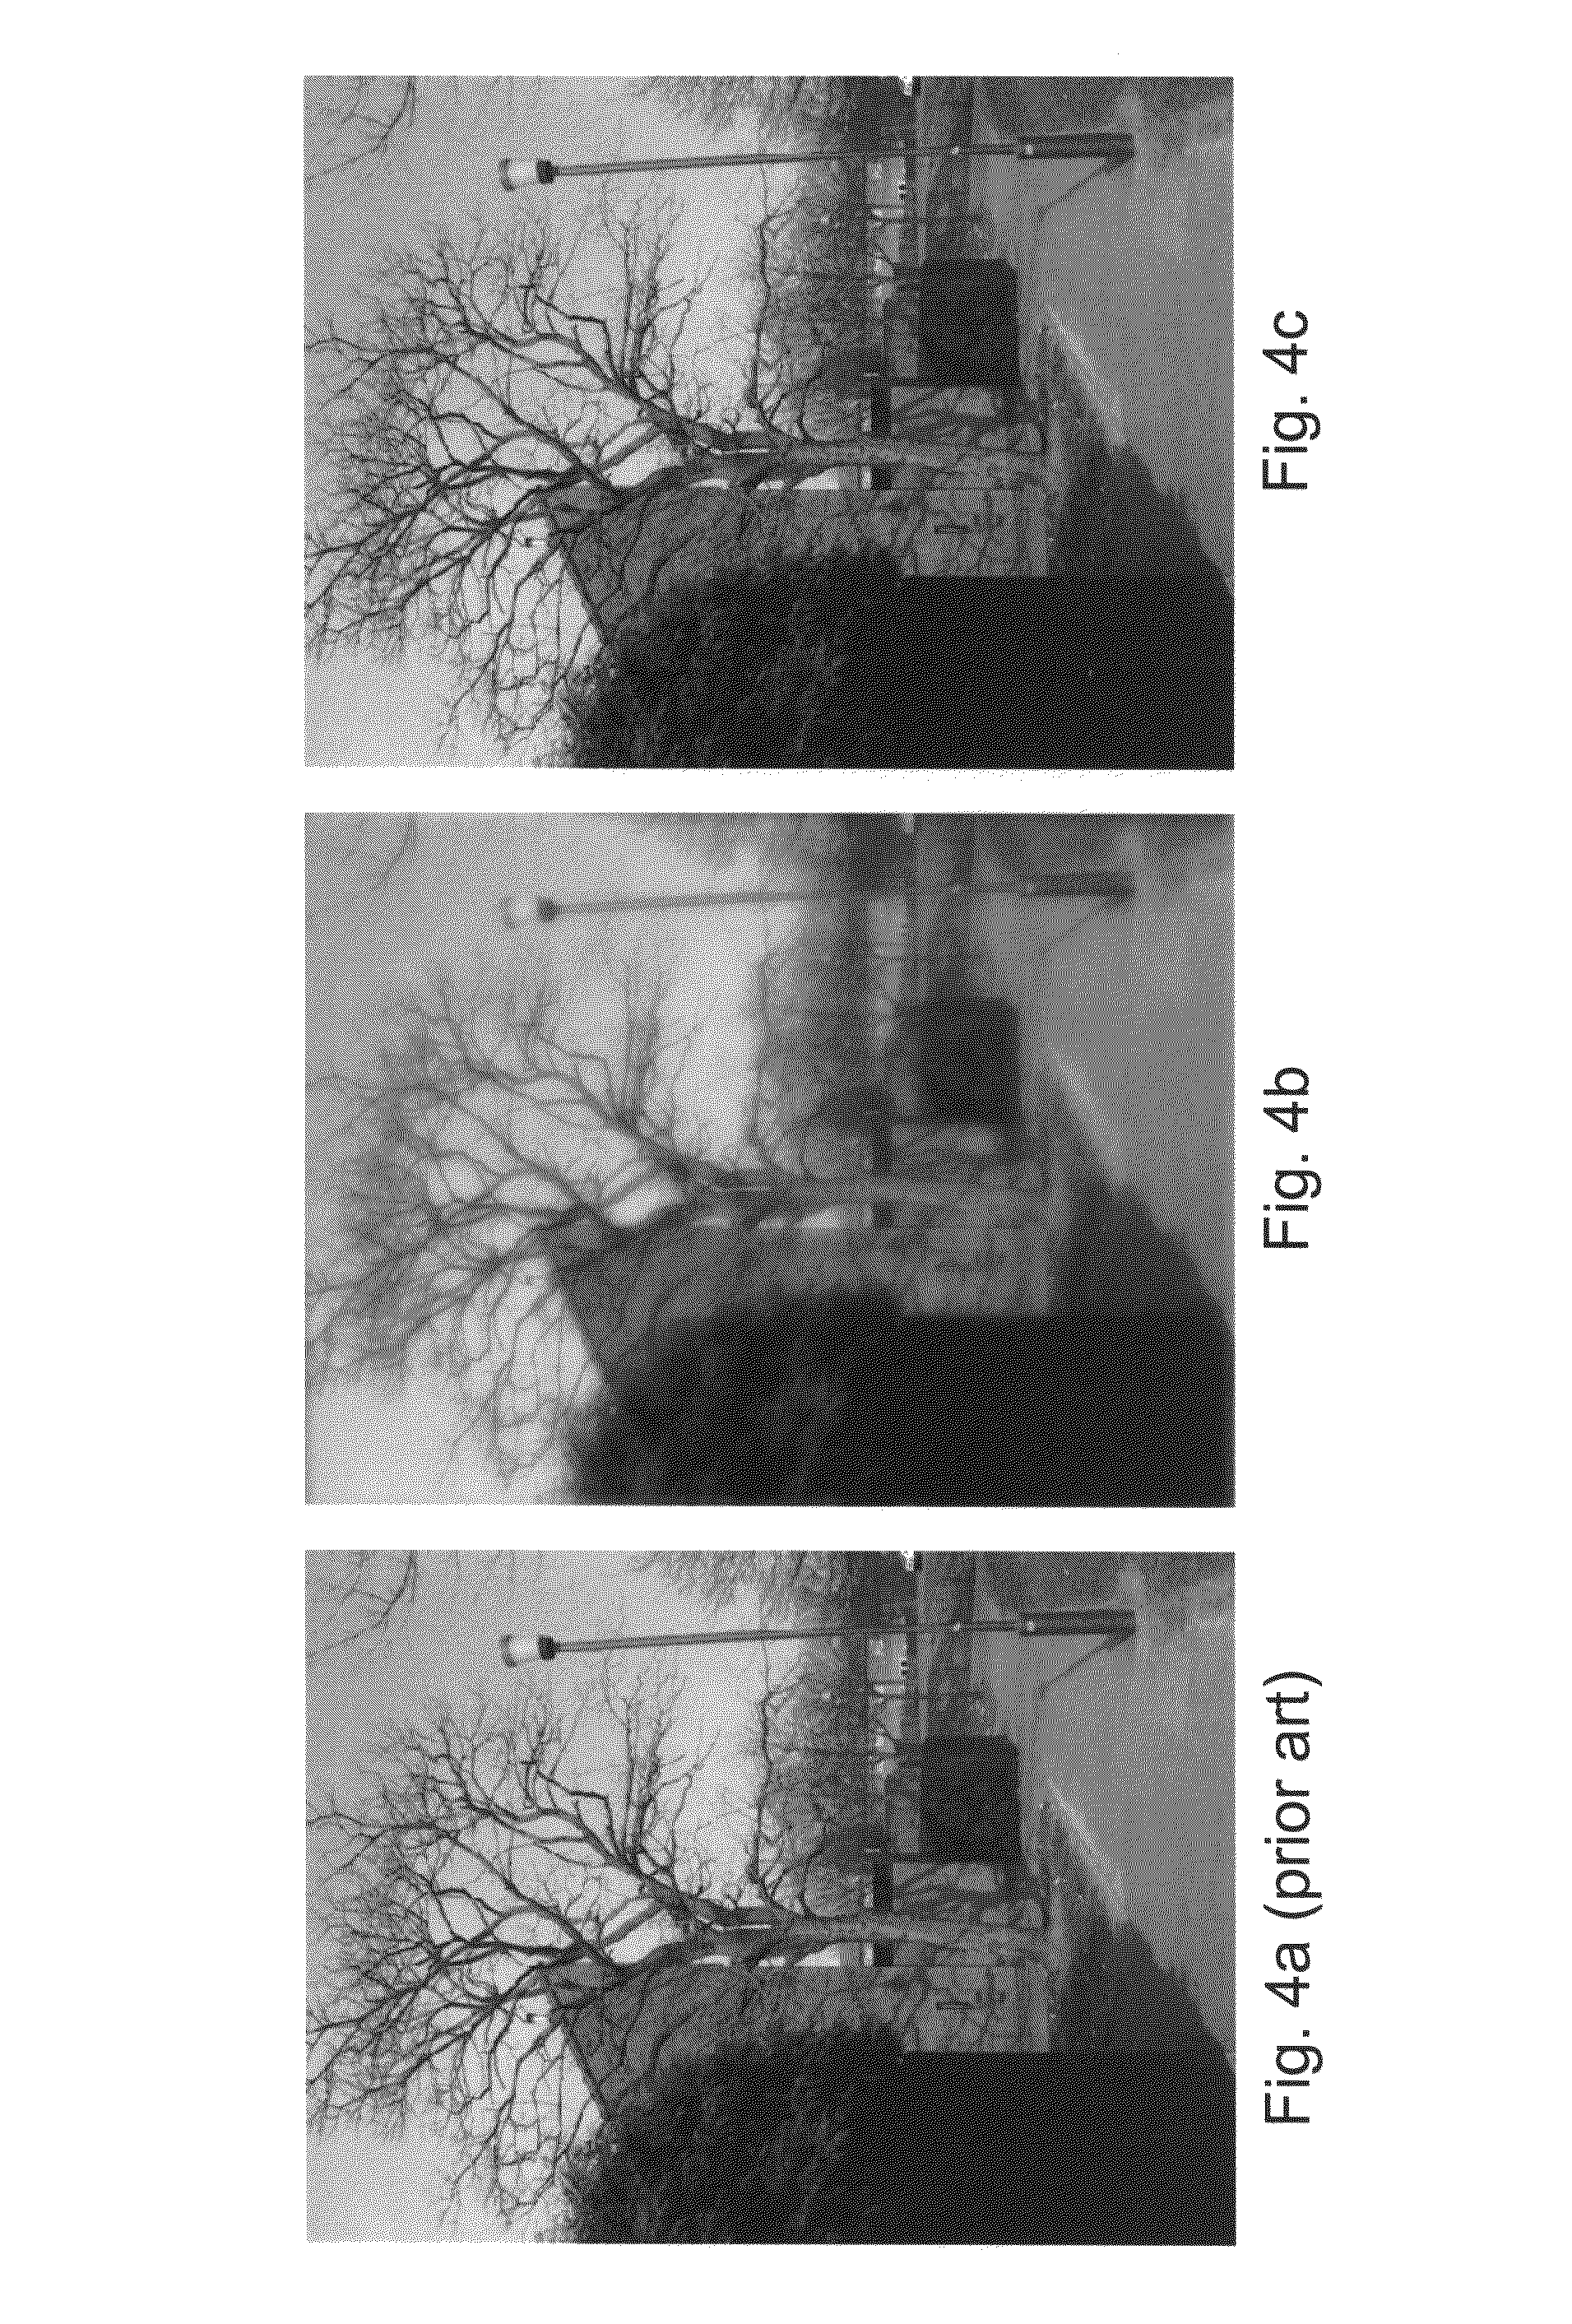 Electro-optic imaging system with aberrated triplet lens compensated by digital image processing